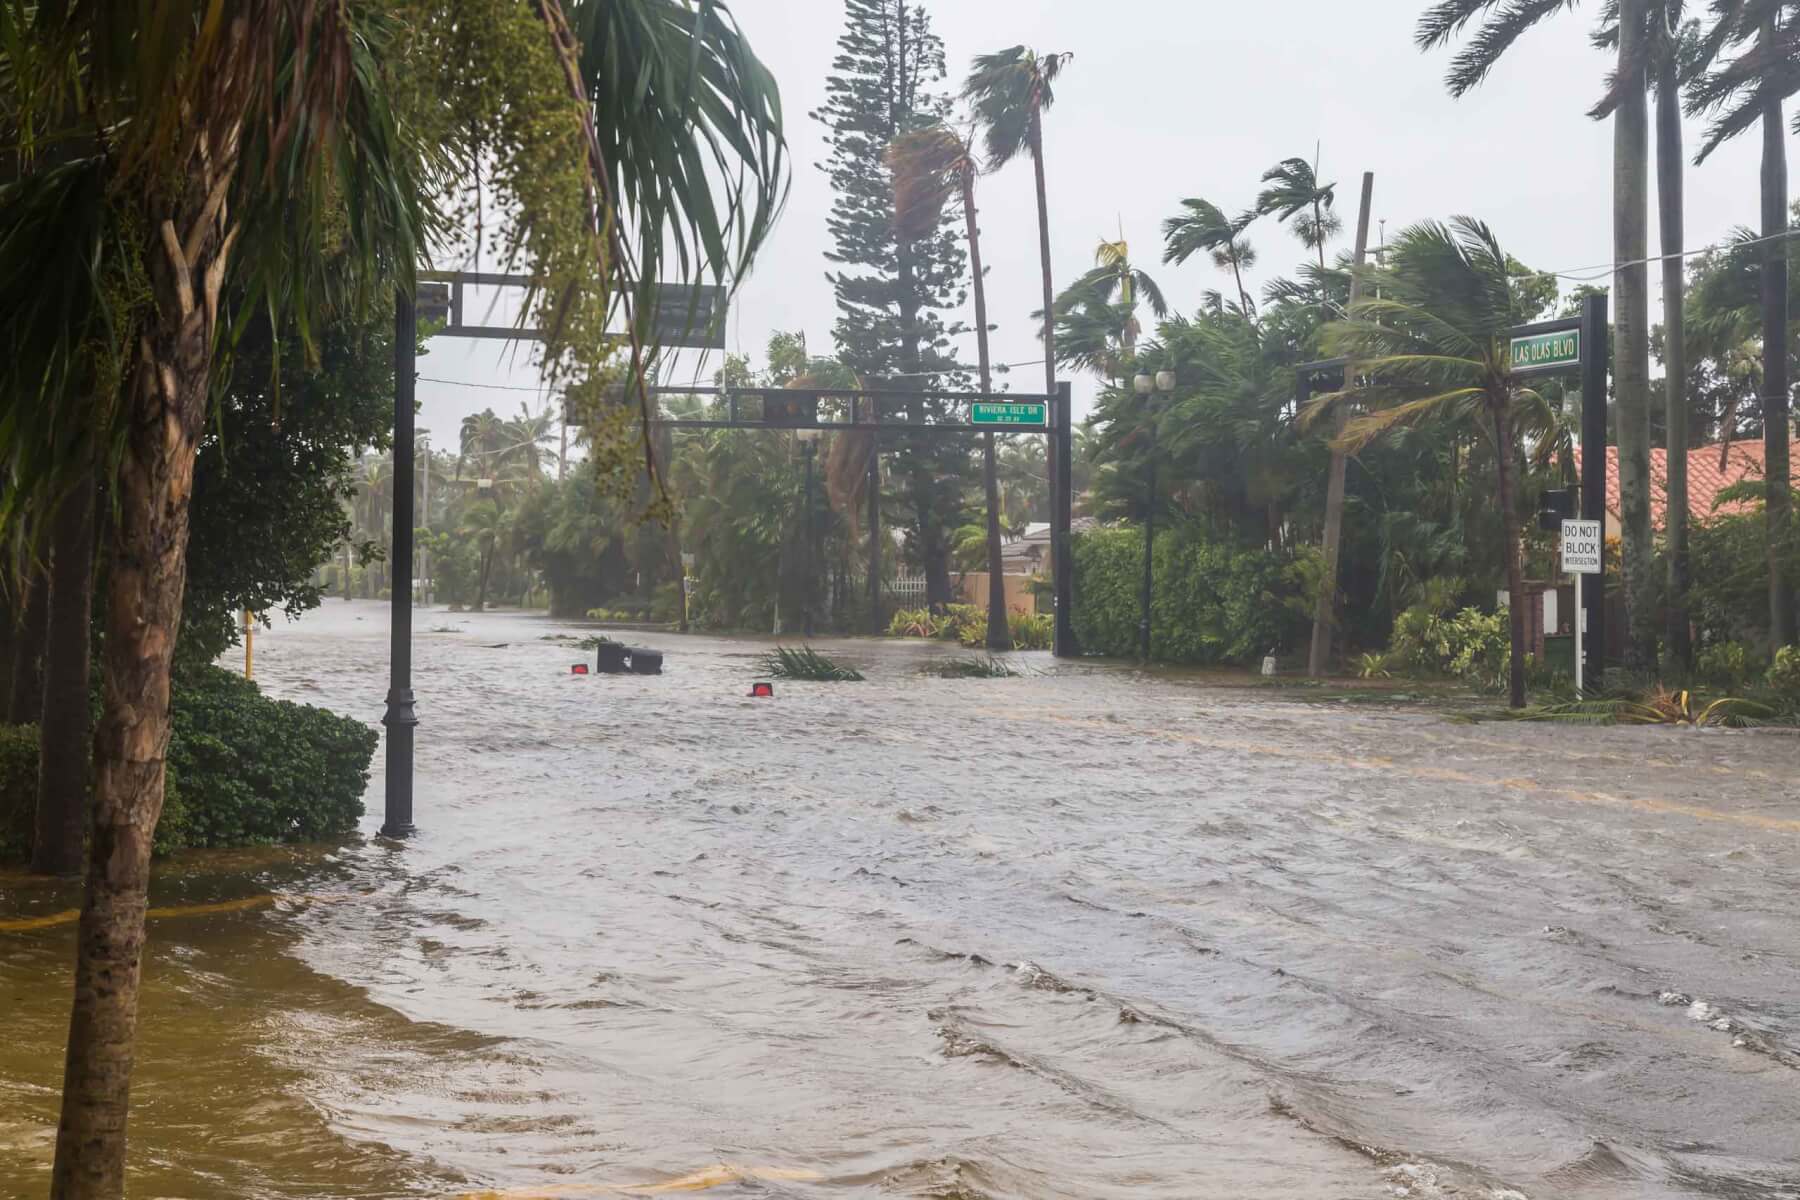 Hurricane Irma and tropical storm at Fort Lauderdale, Florida.